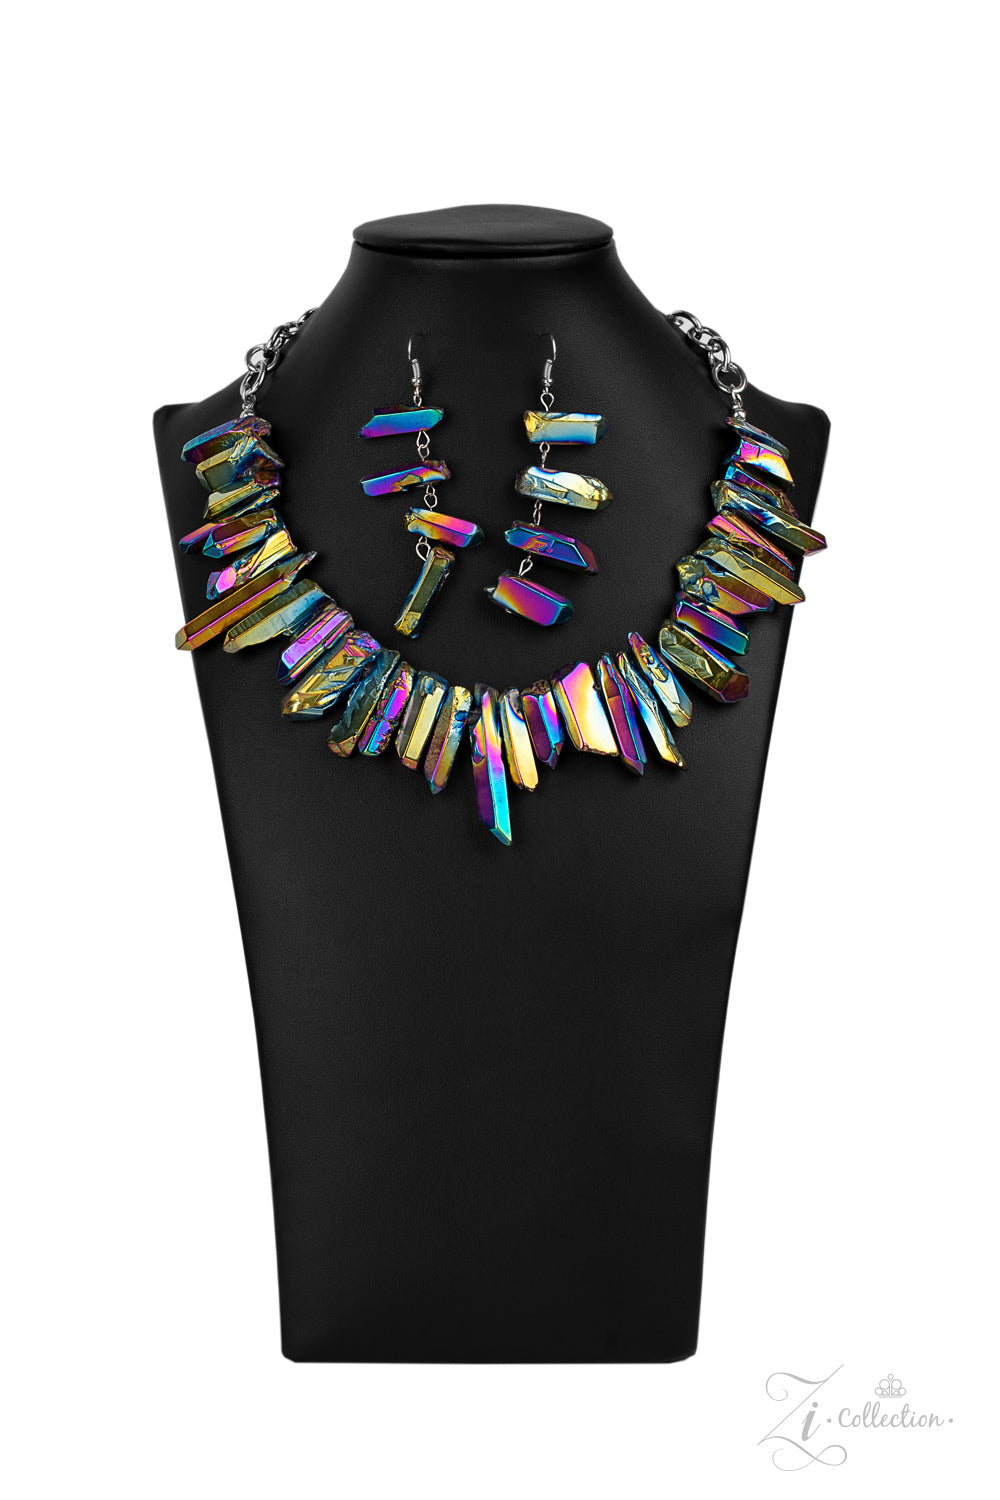 The Charismatic
Zi Collection Necklace - Daria's Blings N Things